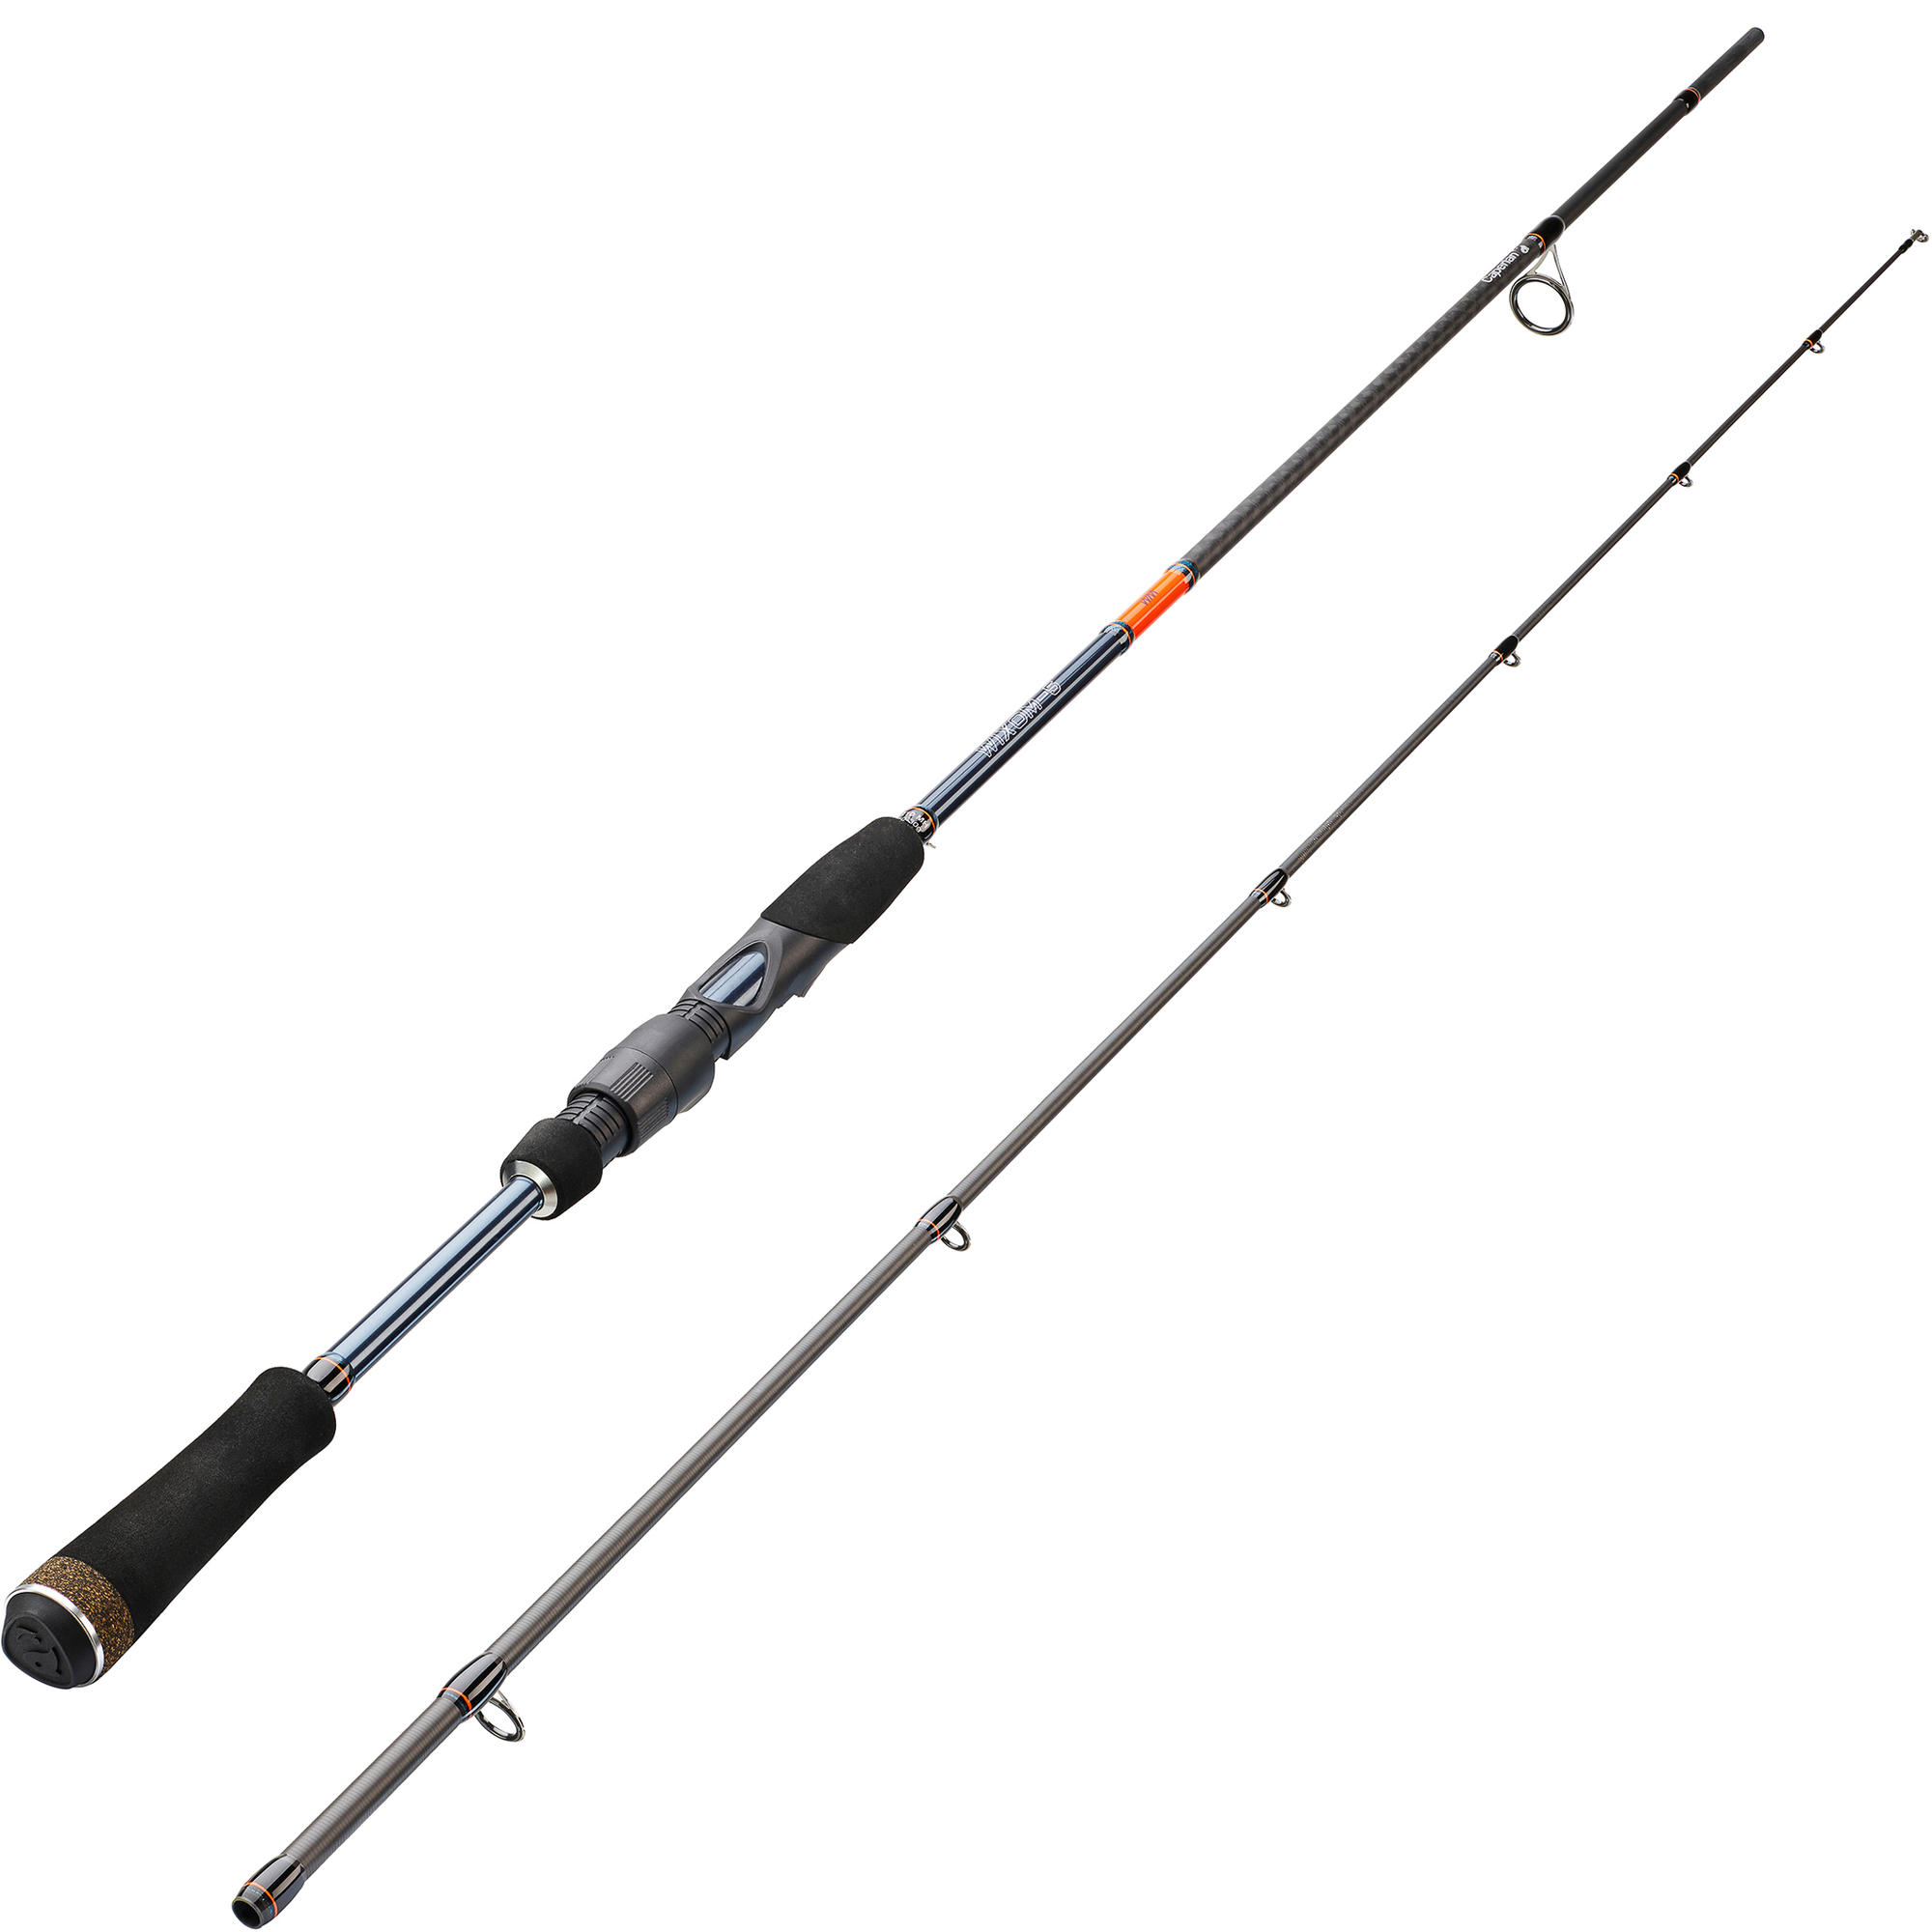 LURE FISHING ROD WIXOM-5 210 MH (10/30 